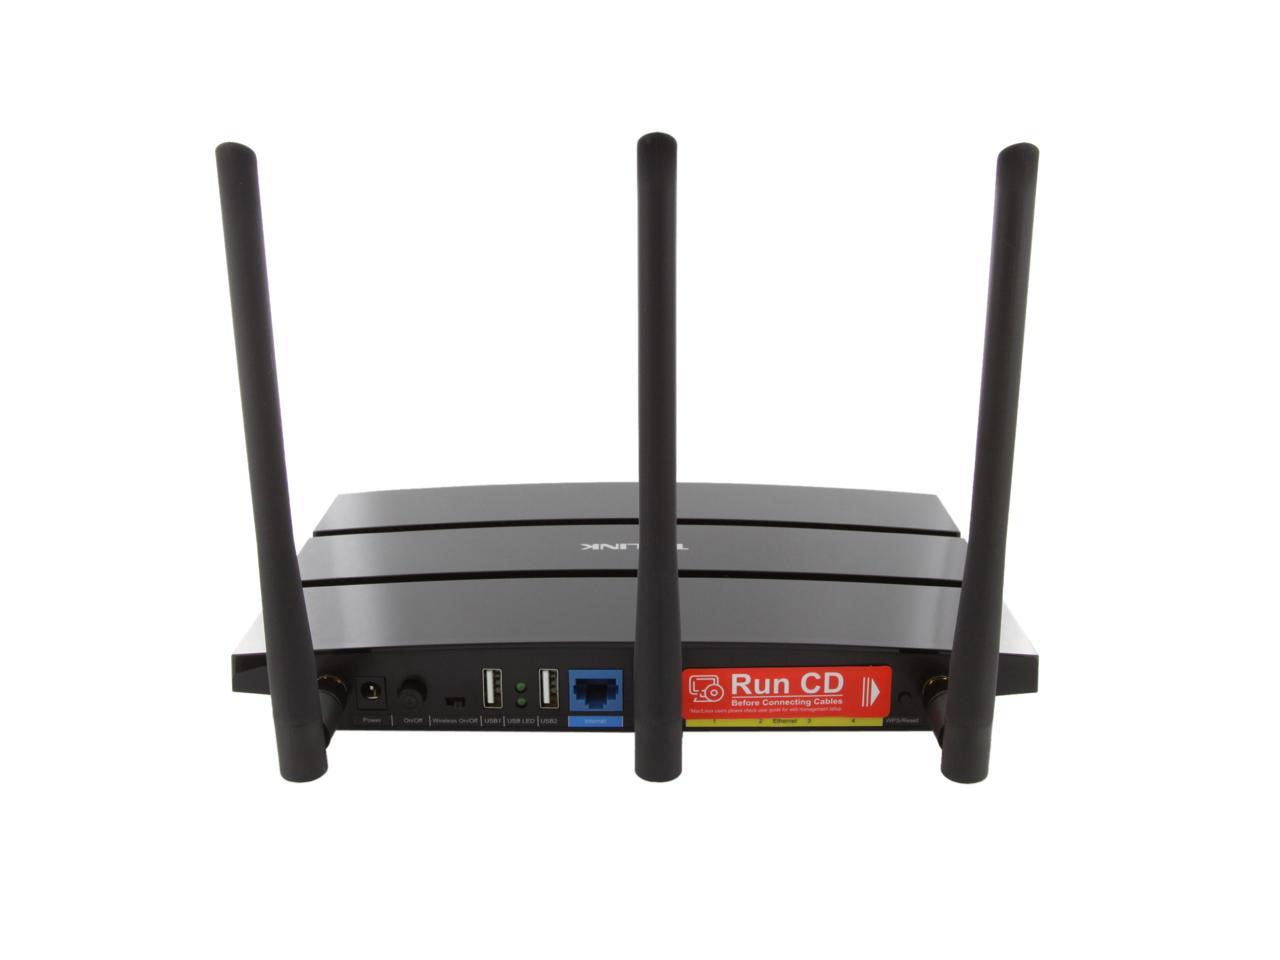 TP-LINK Archer C7 Wireless AC1750 Dual Band Gigabit Router, 450 Mbps on 2.4 GHz + 1300 Mbps on 5 ...